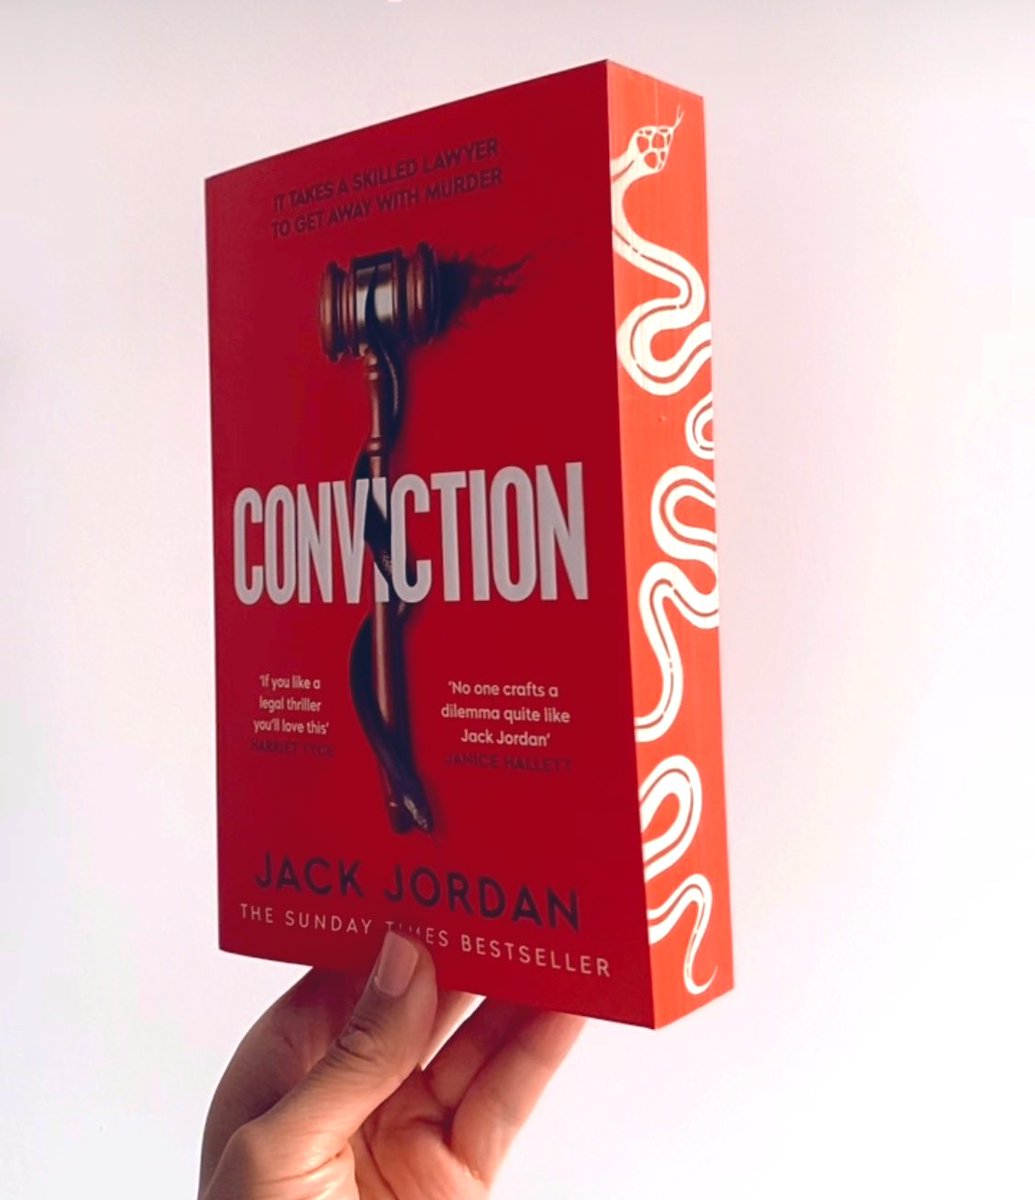 Hosting this #giveaway on my insta with @JackJordanBooks - a chance to win 1 of 2 x copies of this beautiful PB edition with the gorgeous edges 🤩 Link in my bio to head to the reel for more details! @likely_suspects @simonschusterUK #books #BookTwitter